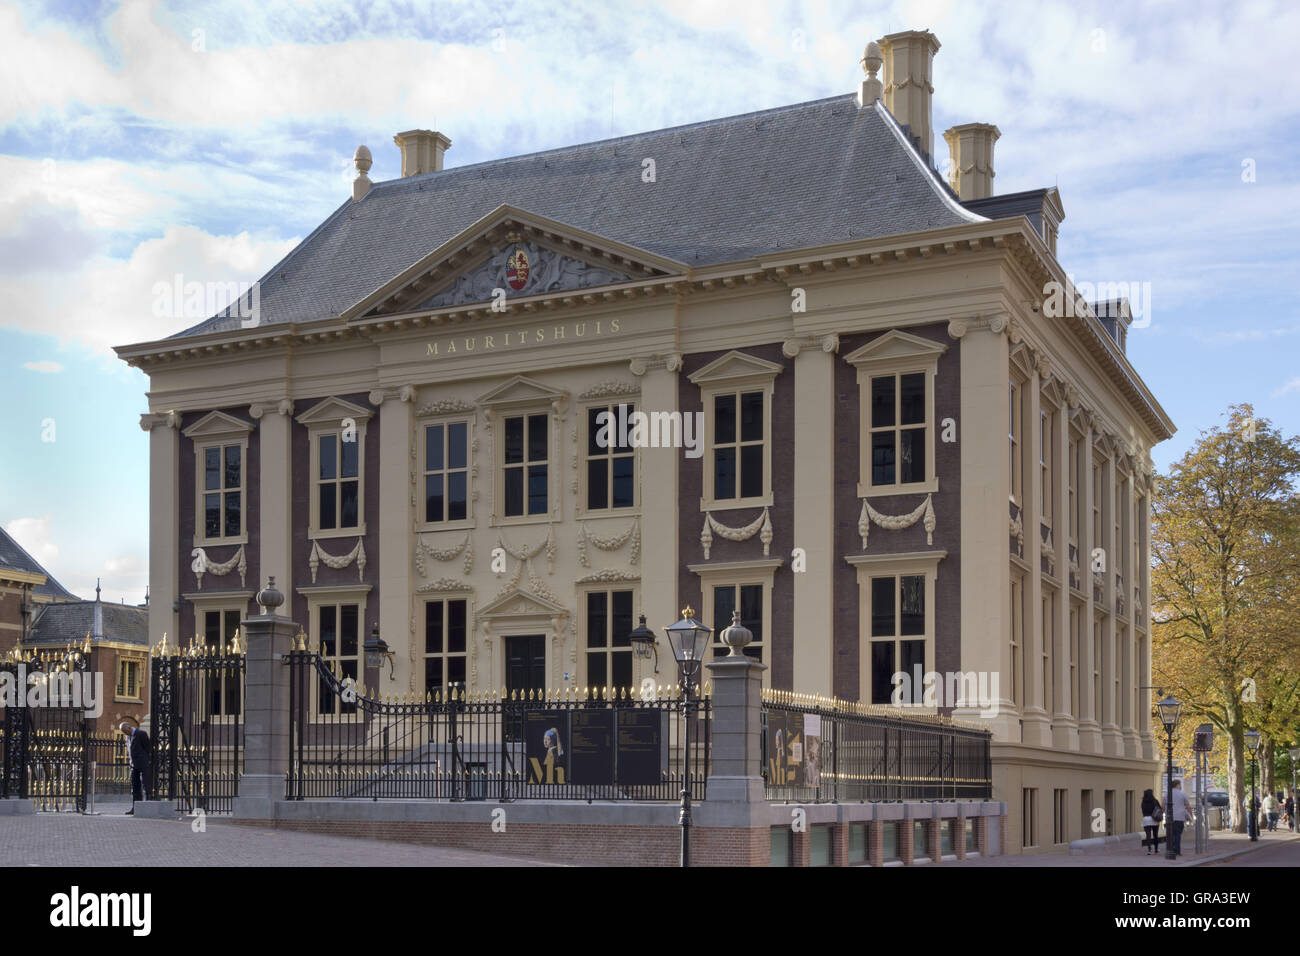 Mauritshuis Museum, The Hague, The Netherlands, Europe Stock Photo